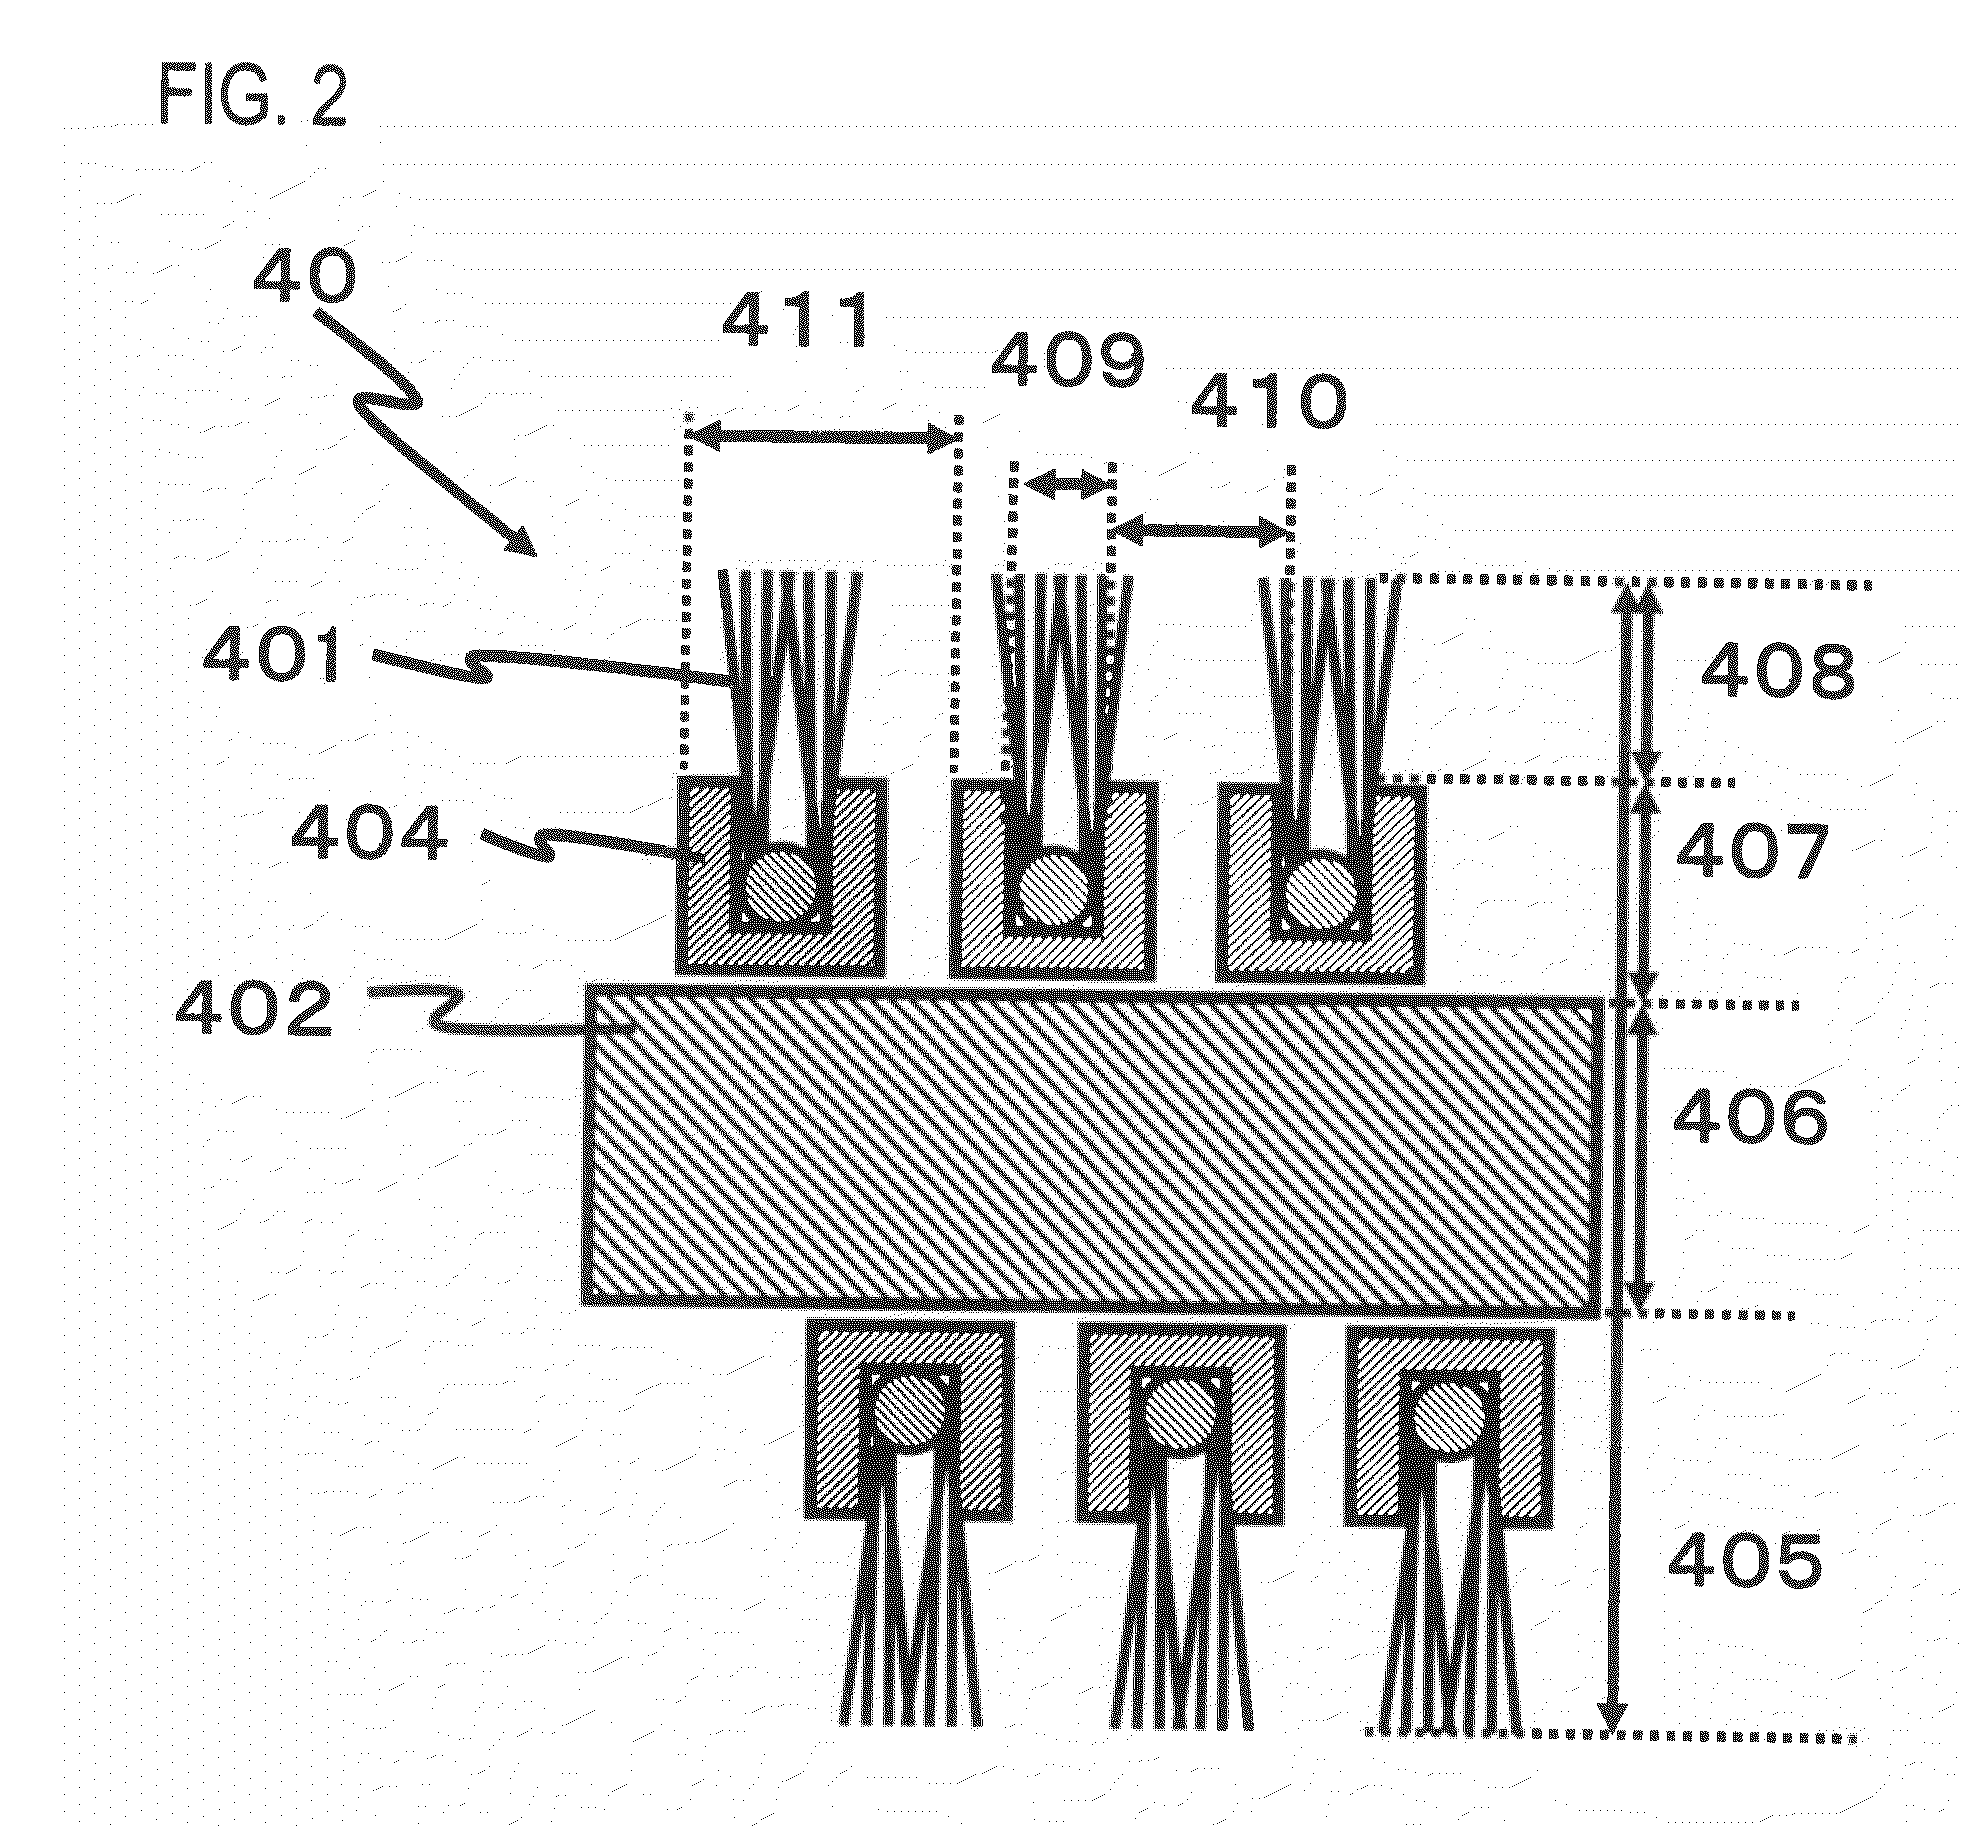 Magnetic recording medium glass substrate and method of manufacturing the same